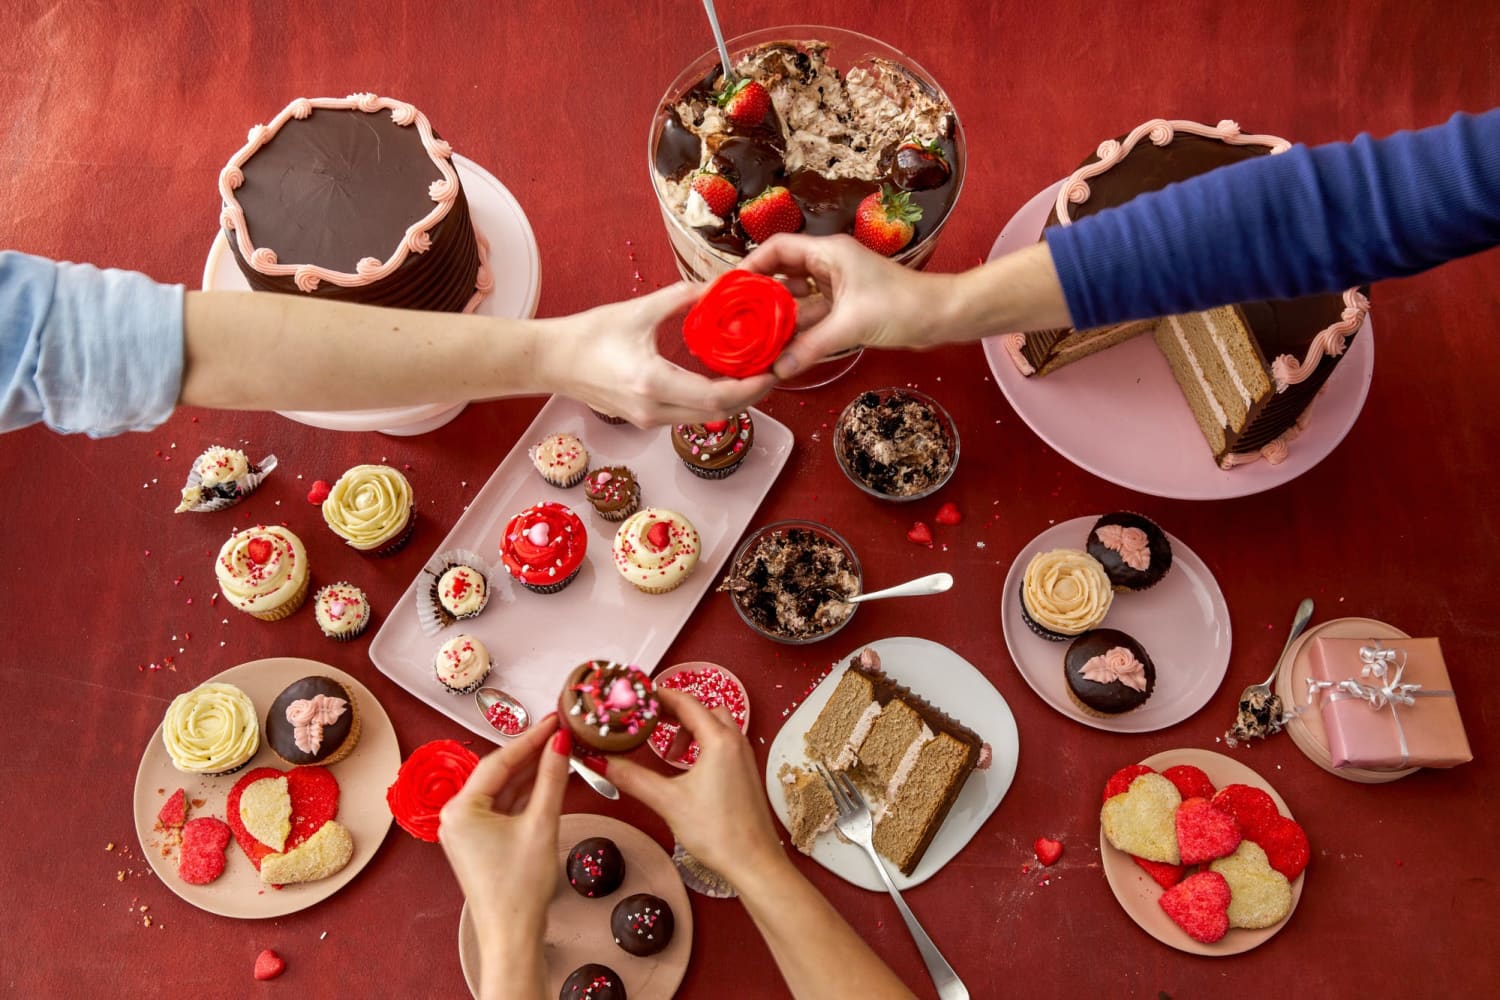 The Best Valentine's Day Food Gift Ideas for Your Partner